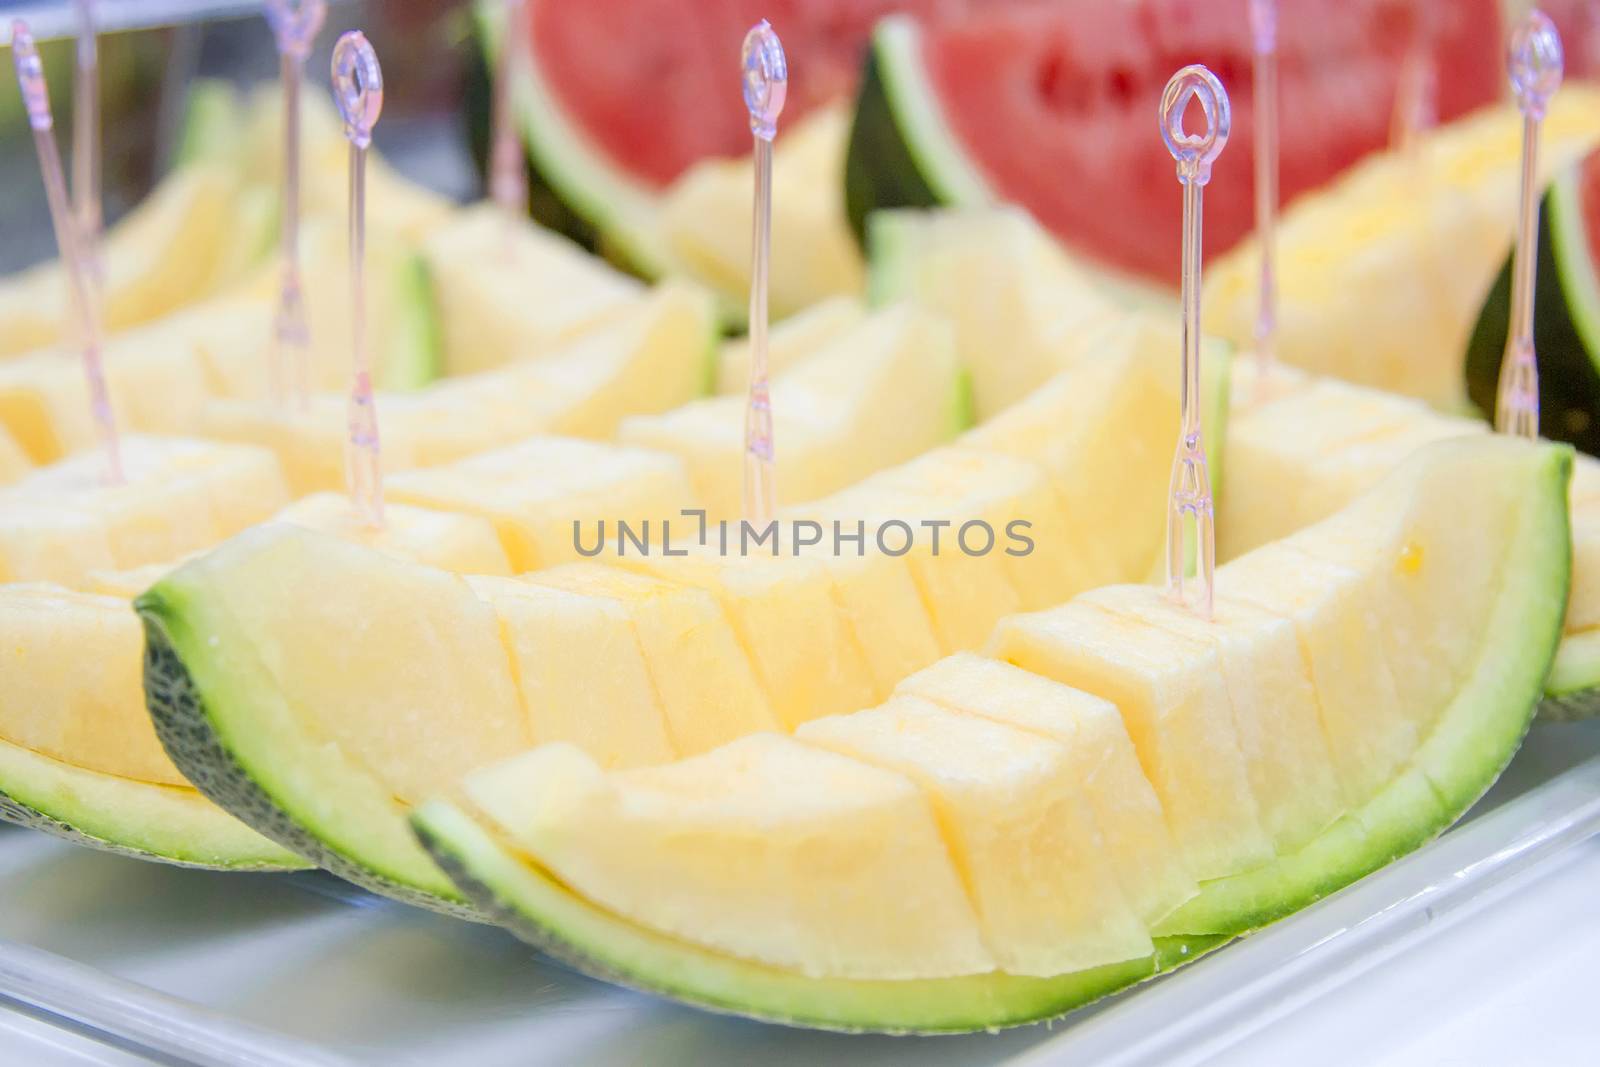 Melon sliced on a tray with a dipper.